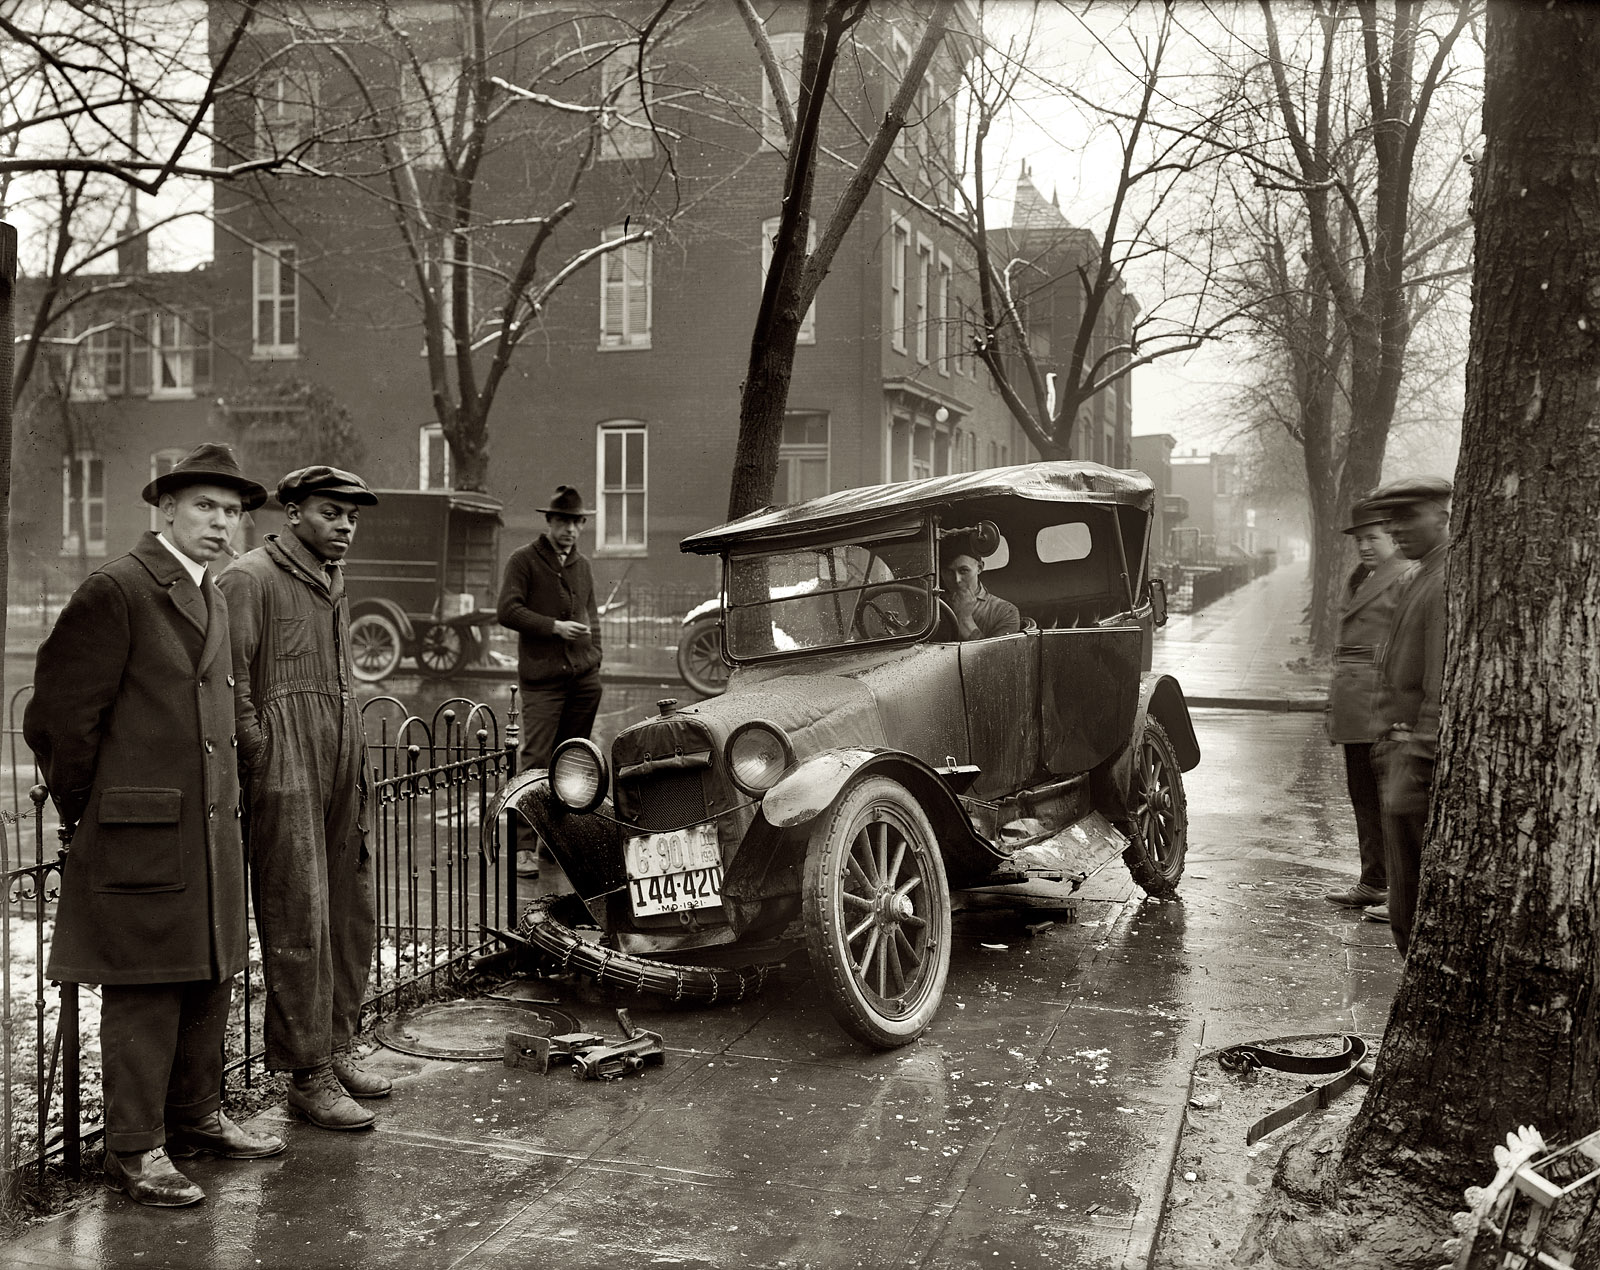 1921. "Auto wreck." Vehicular mishap on a wintry day on the streets (and sidewalks) of Washington, D.C. View full size. National Photo Company.